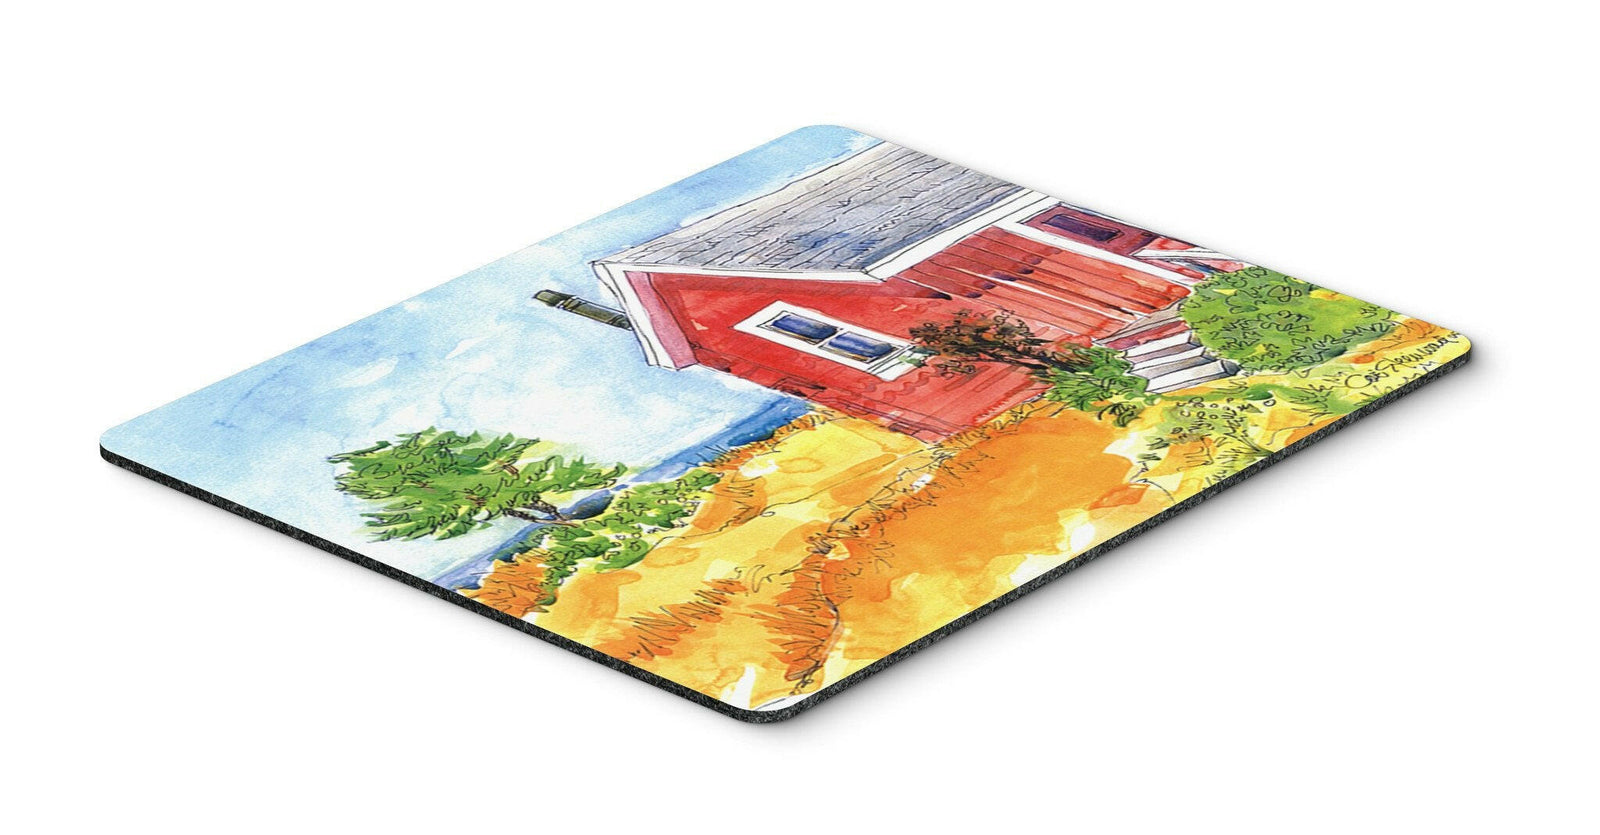 Old Red Cottage House at the lake or Beach Mouse pad, hot pad, or trivet by Caroline's Treasures